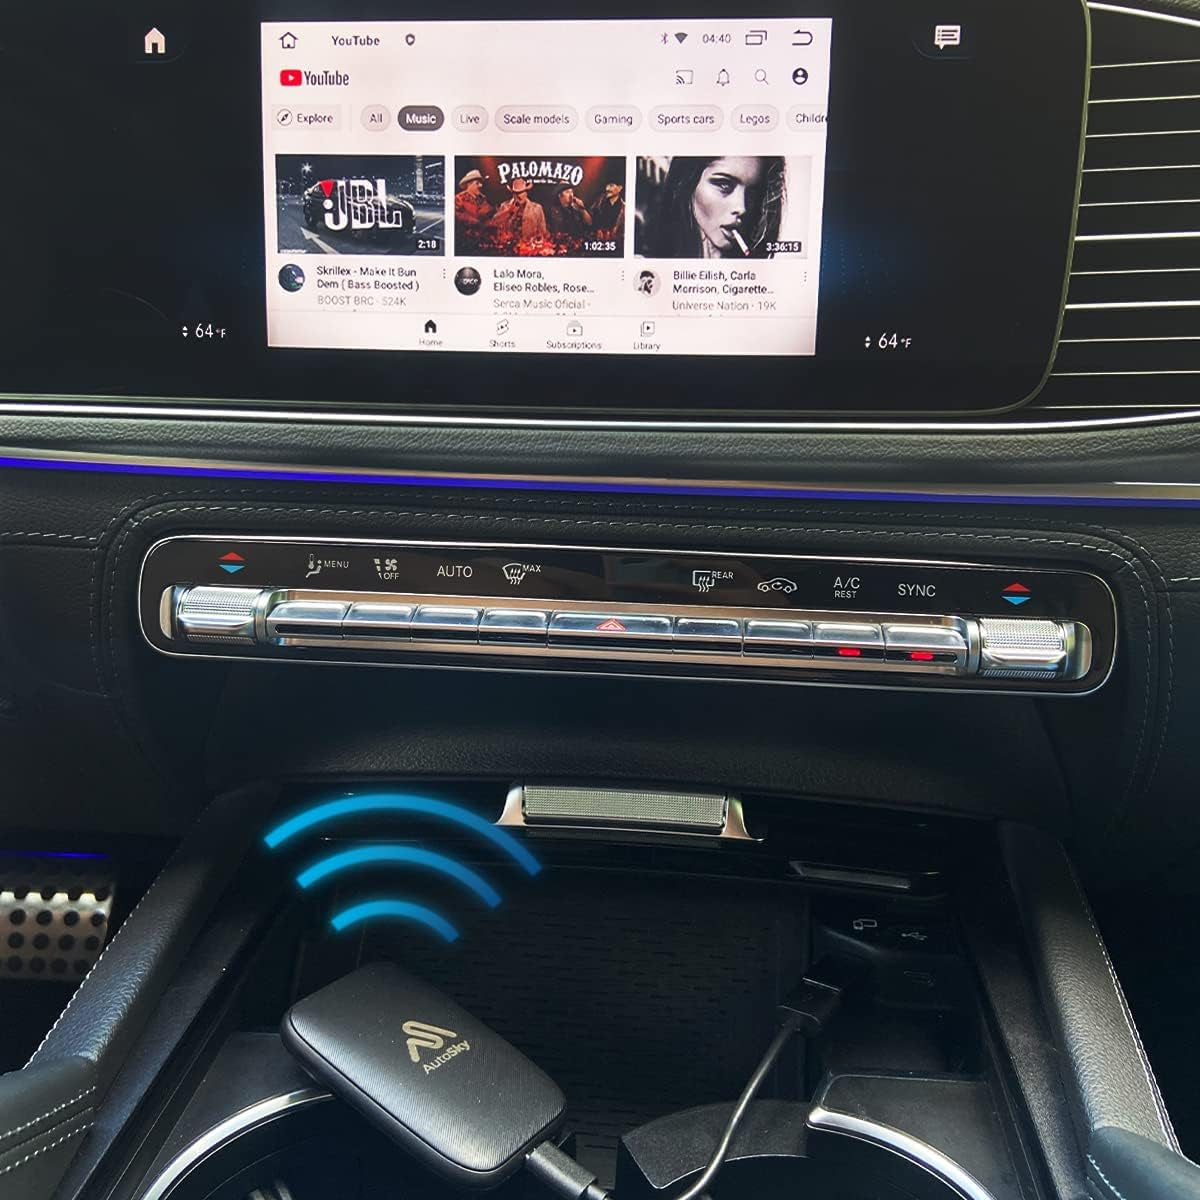 Wireless Carplay and Android Auto AI Box Lite for Factory Wired Carplay Cars - Supports Netflix and Youtube - Go Wireless Carplay and Android Auto. Wired Carplay Required